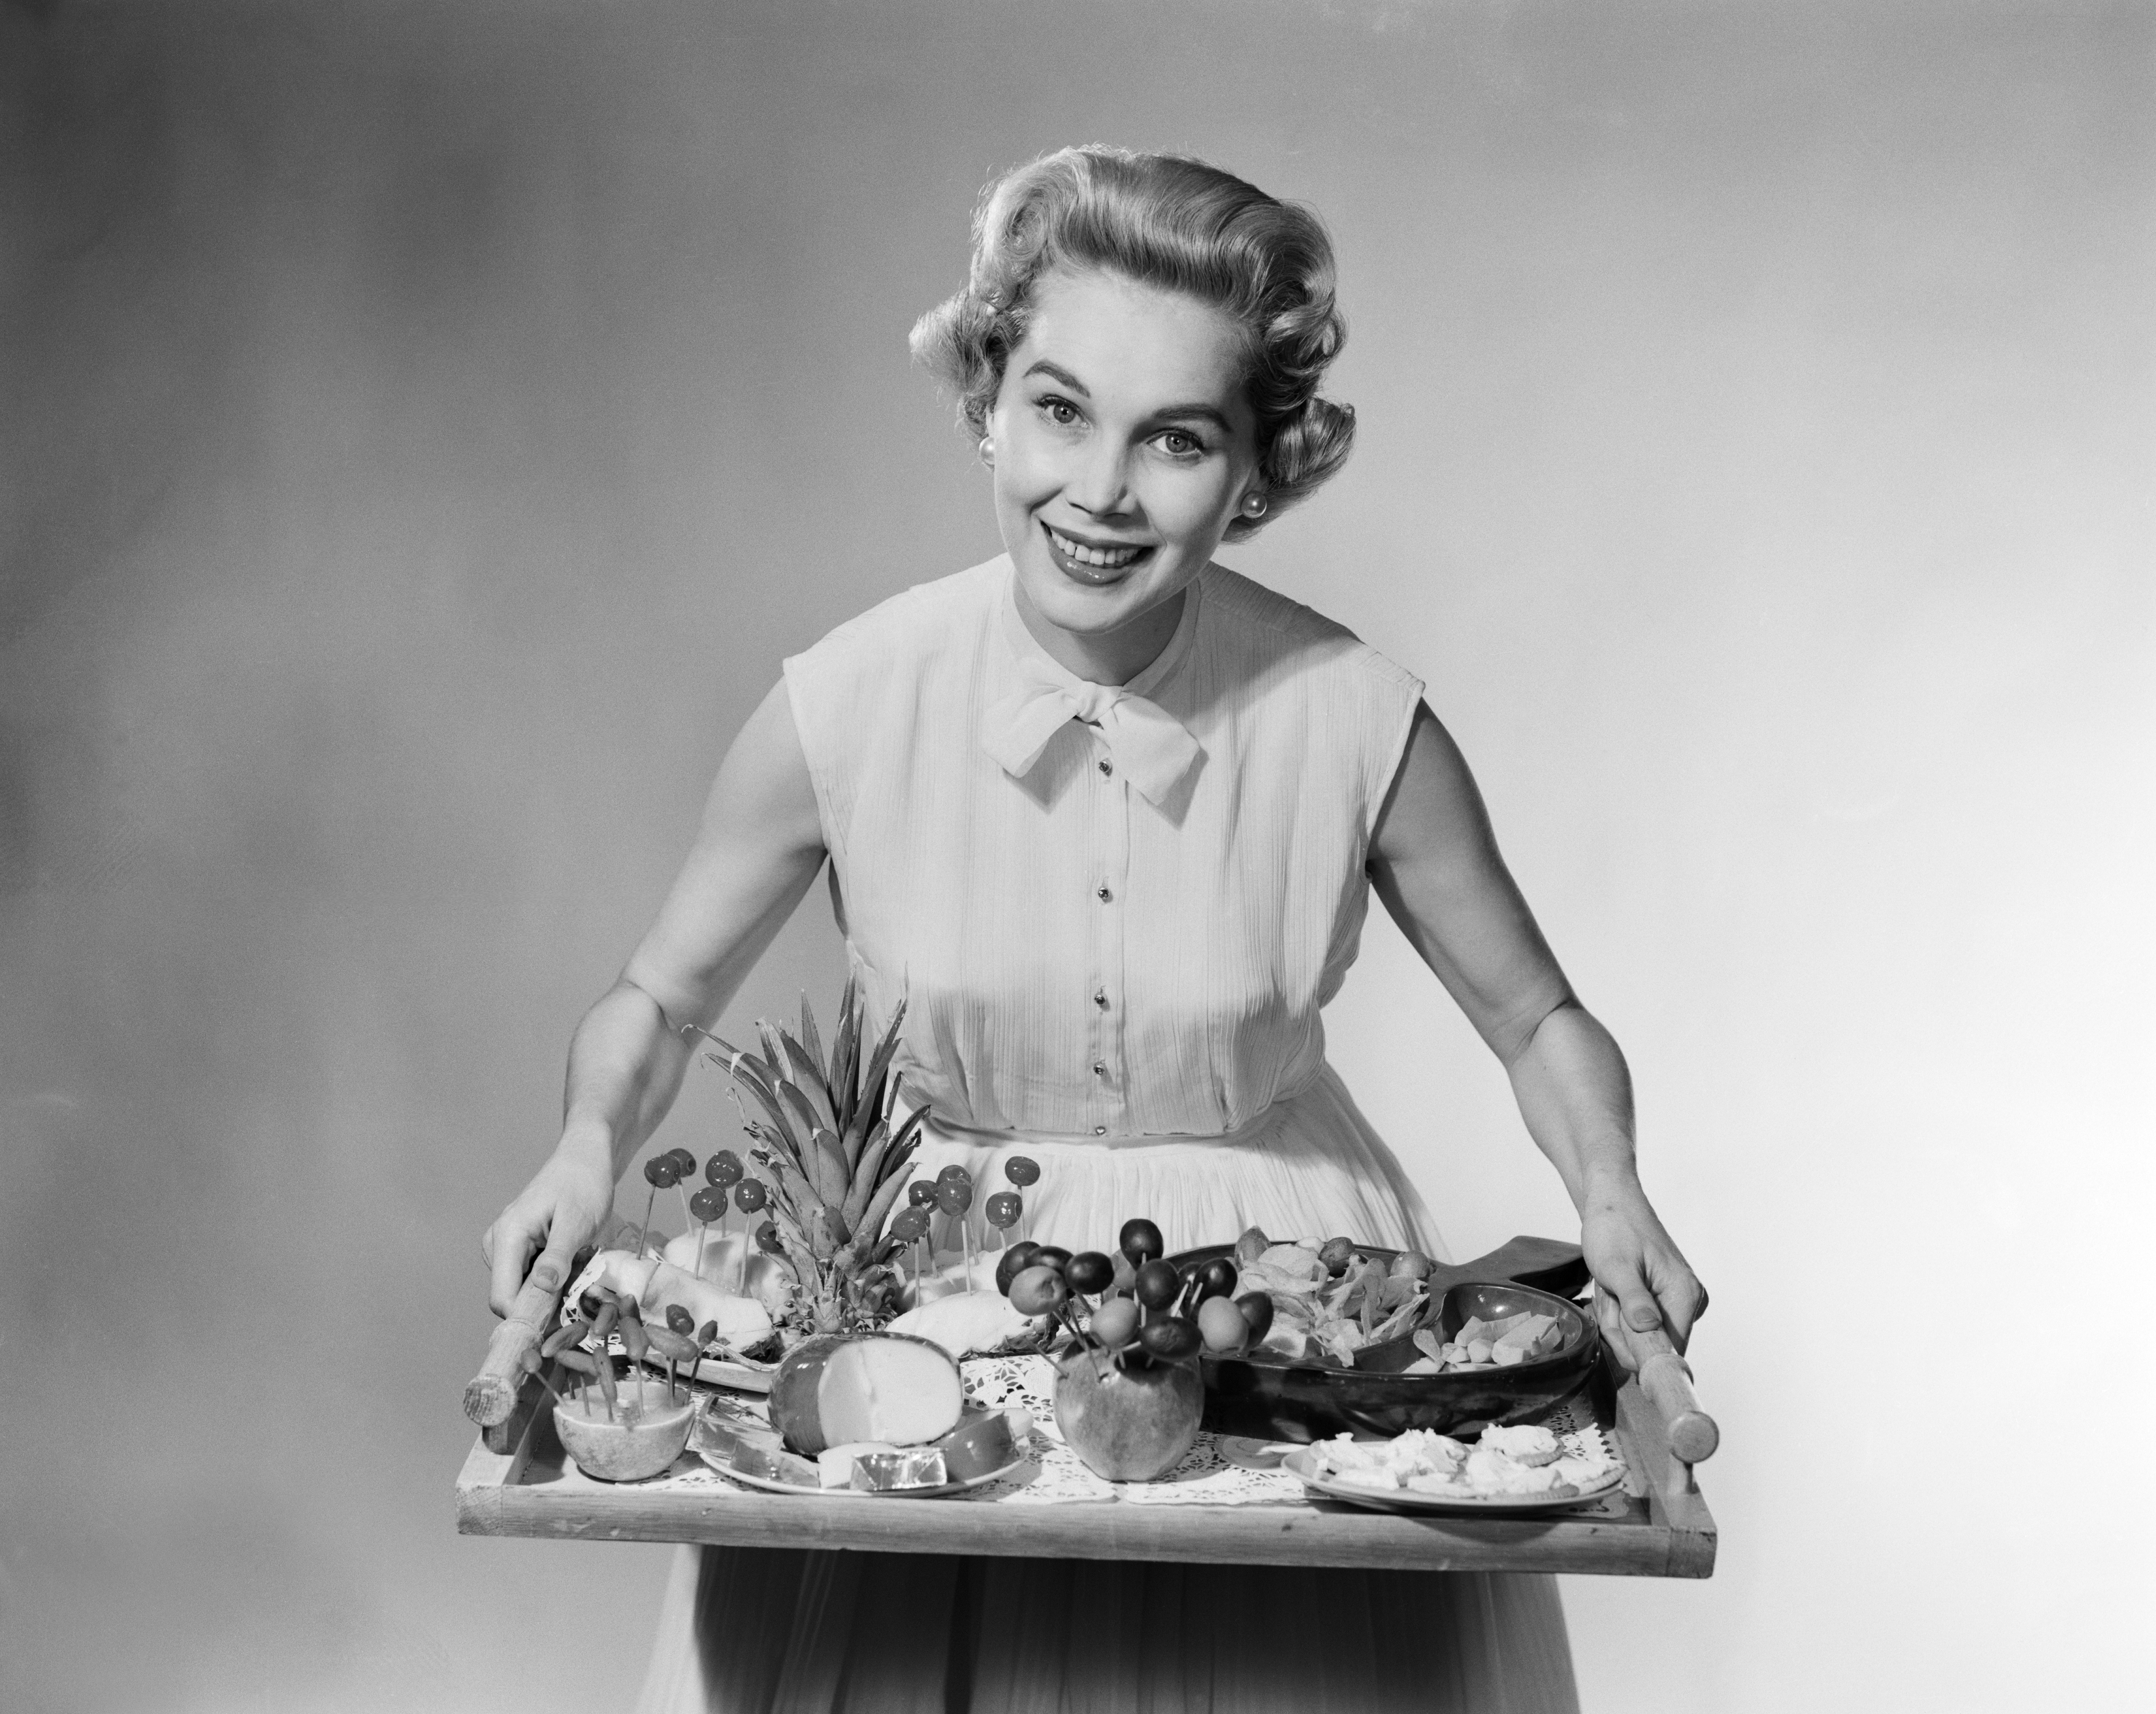 A black and white photo of a woman holding a tray of food